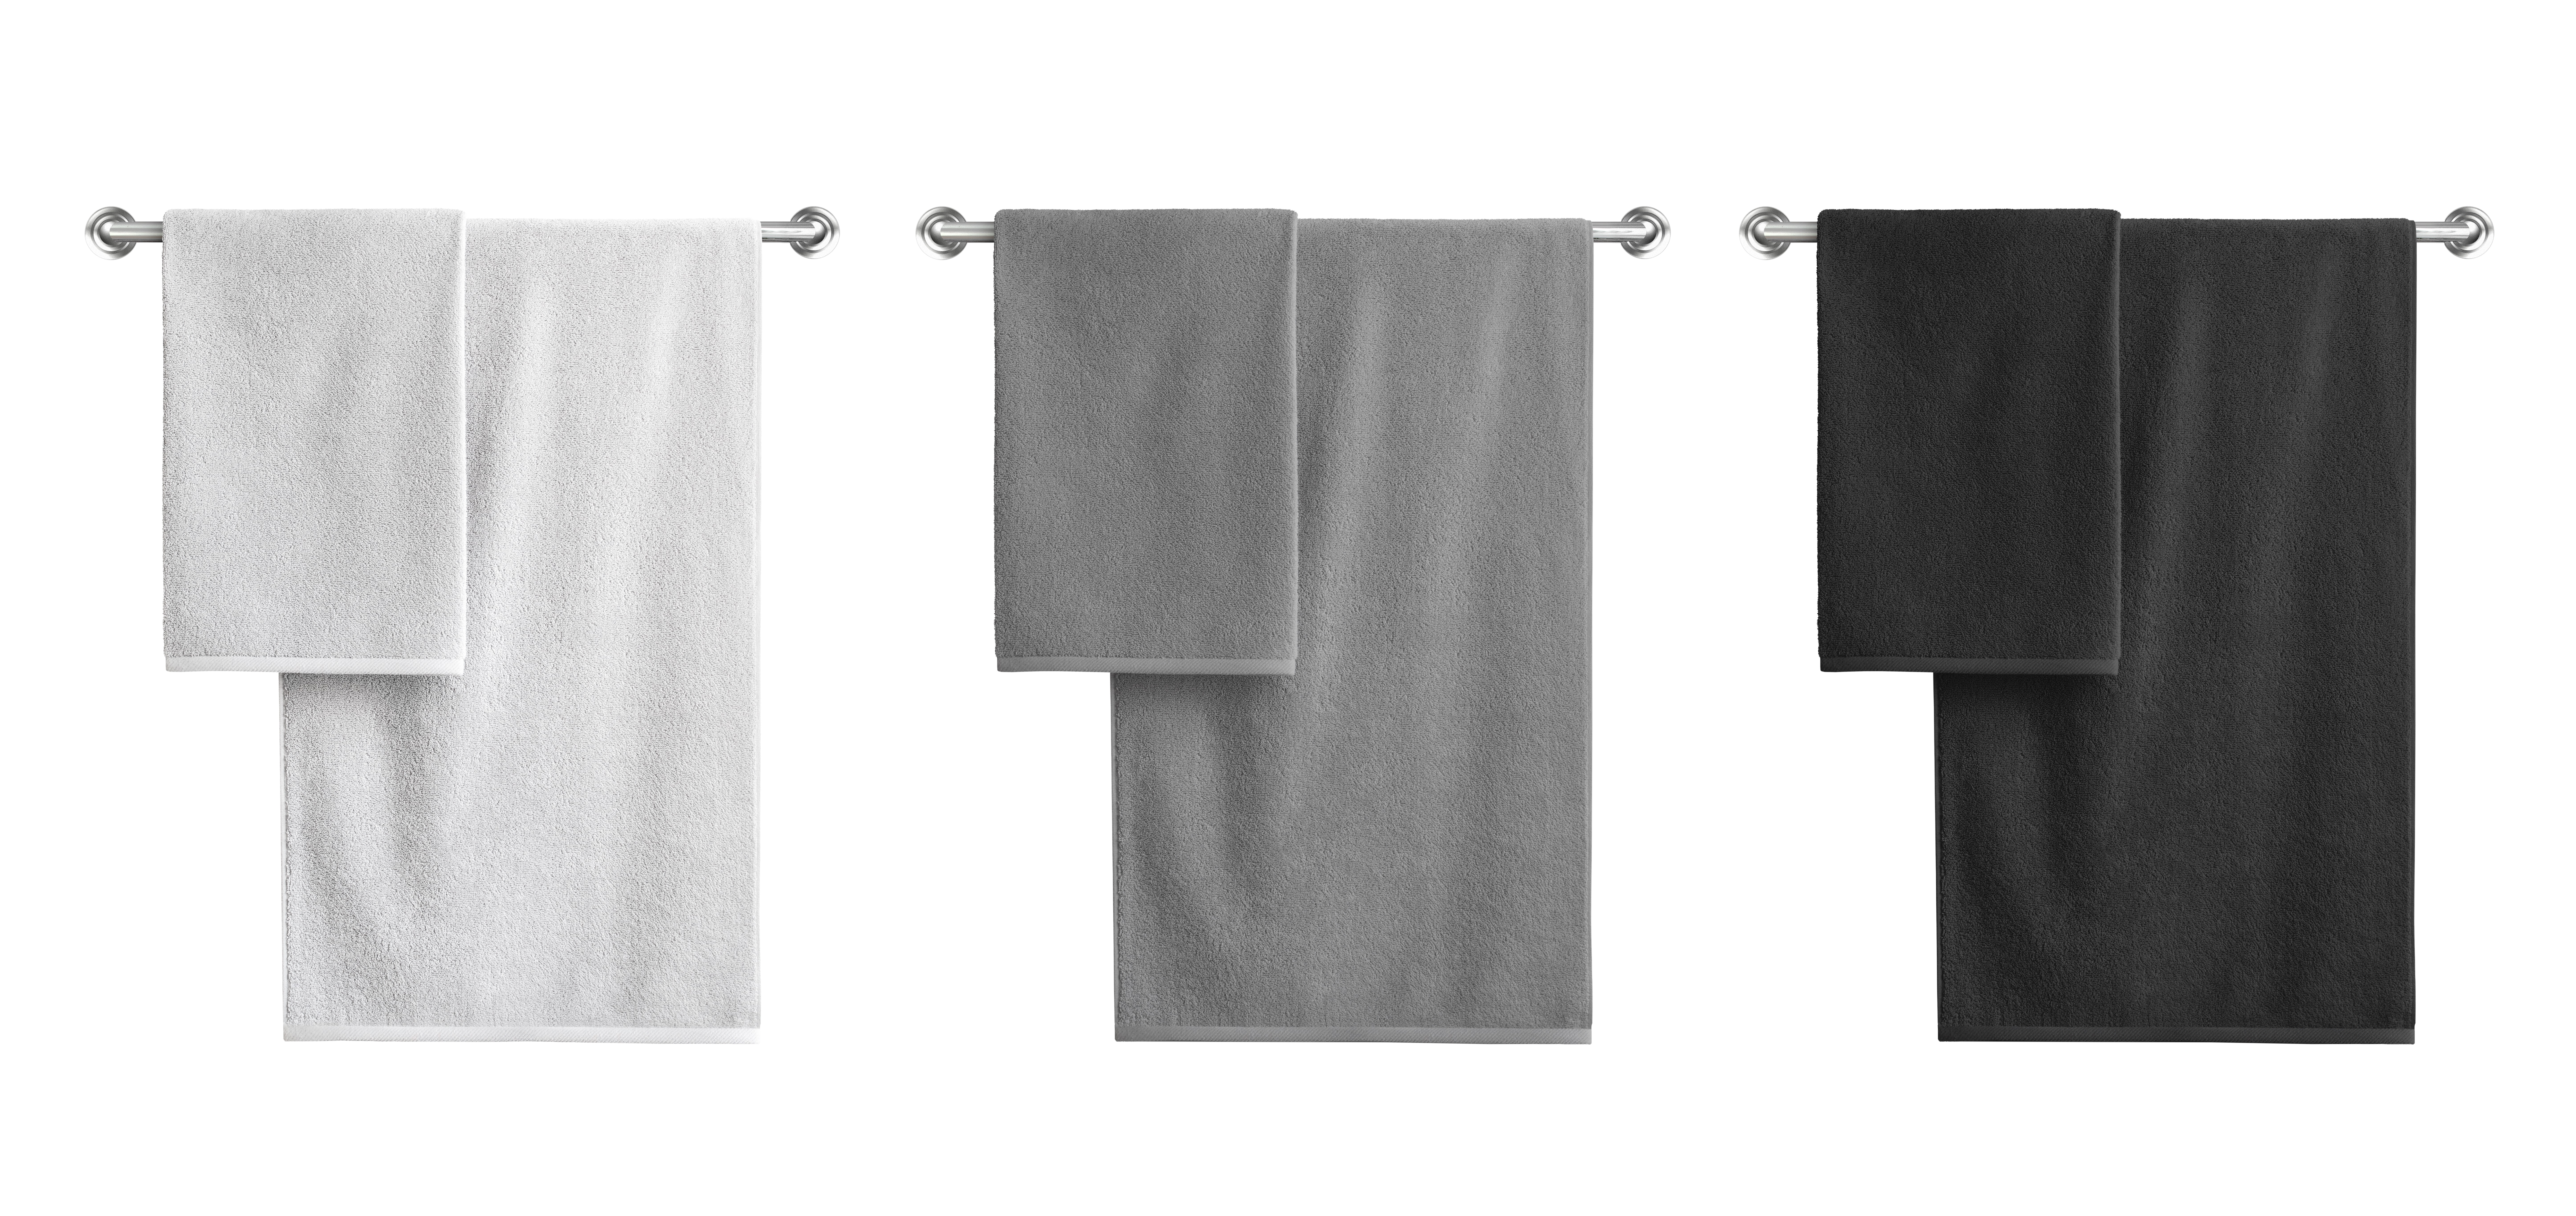 White,,Black,And,Grey,Cotton,Terry,Towels,Hanging,On,A